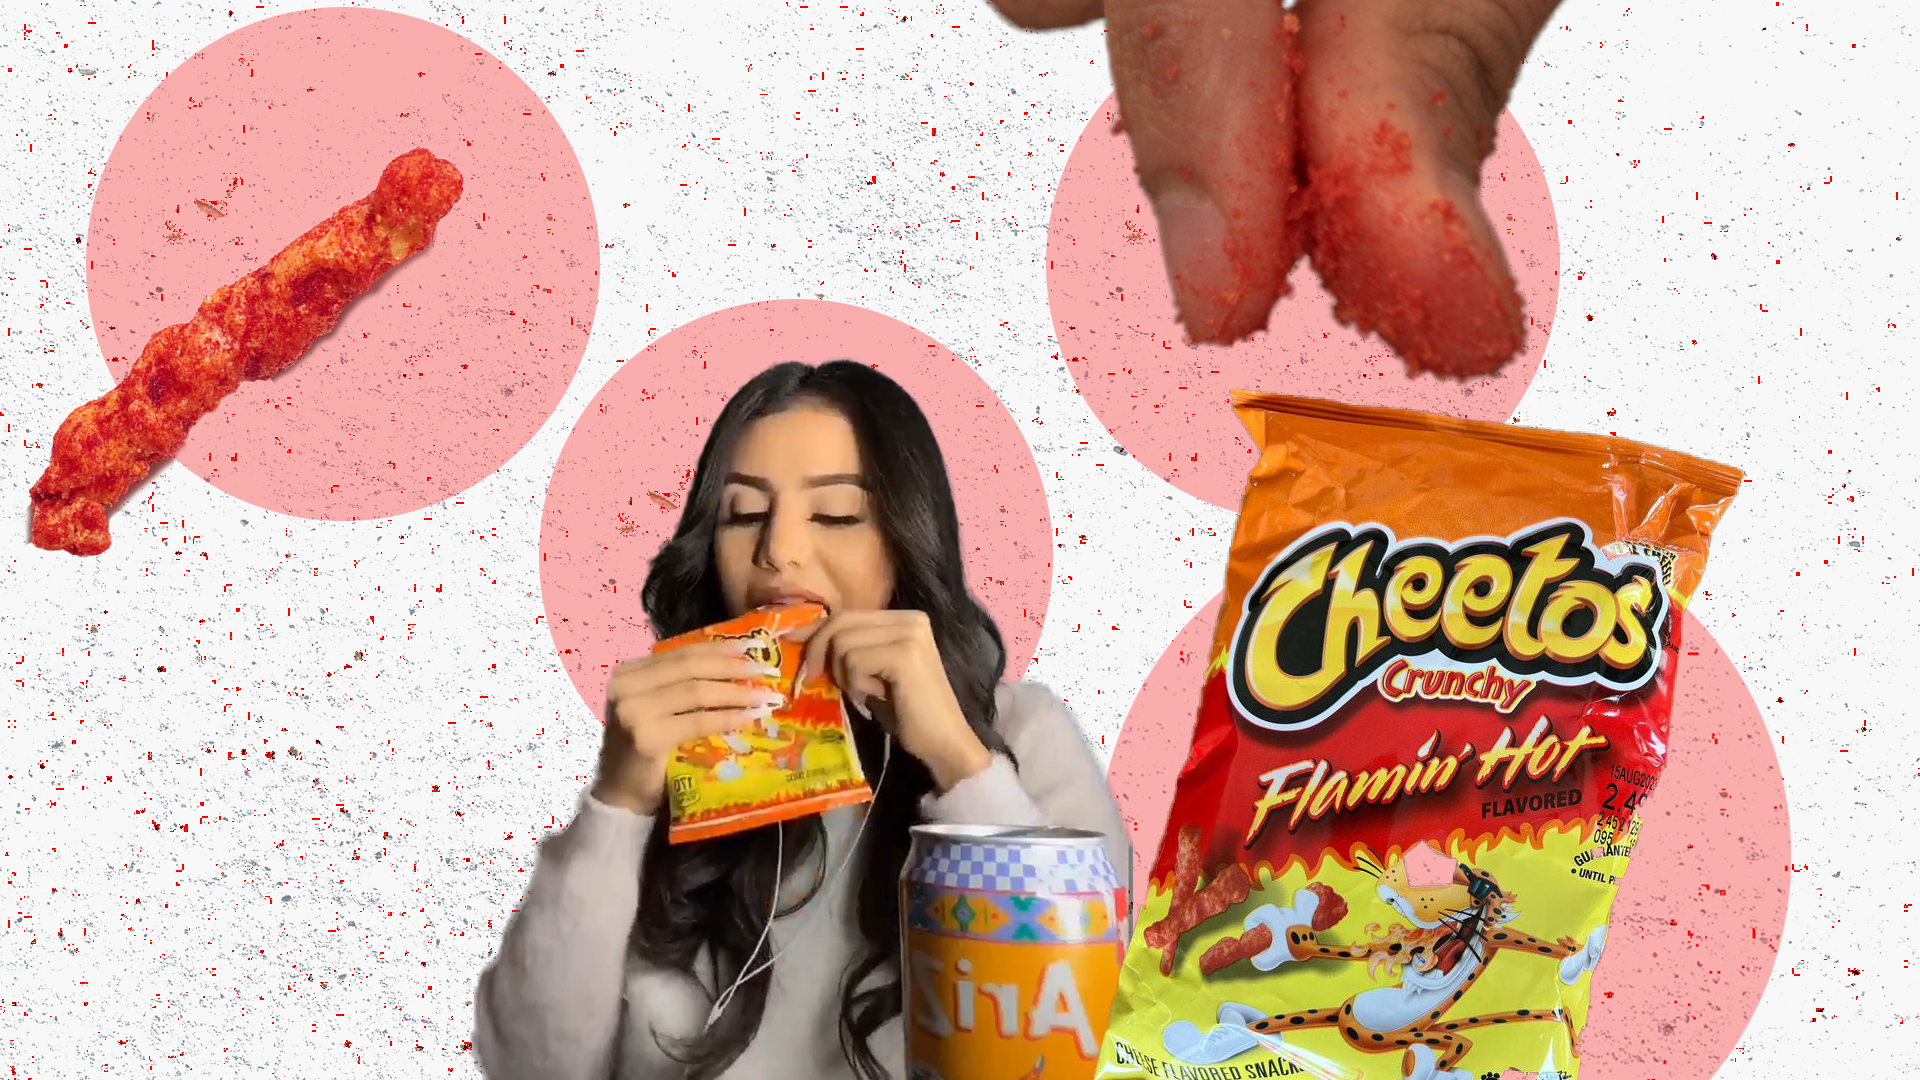 Flamin' Hot Cheetos is America's Favorite Snack